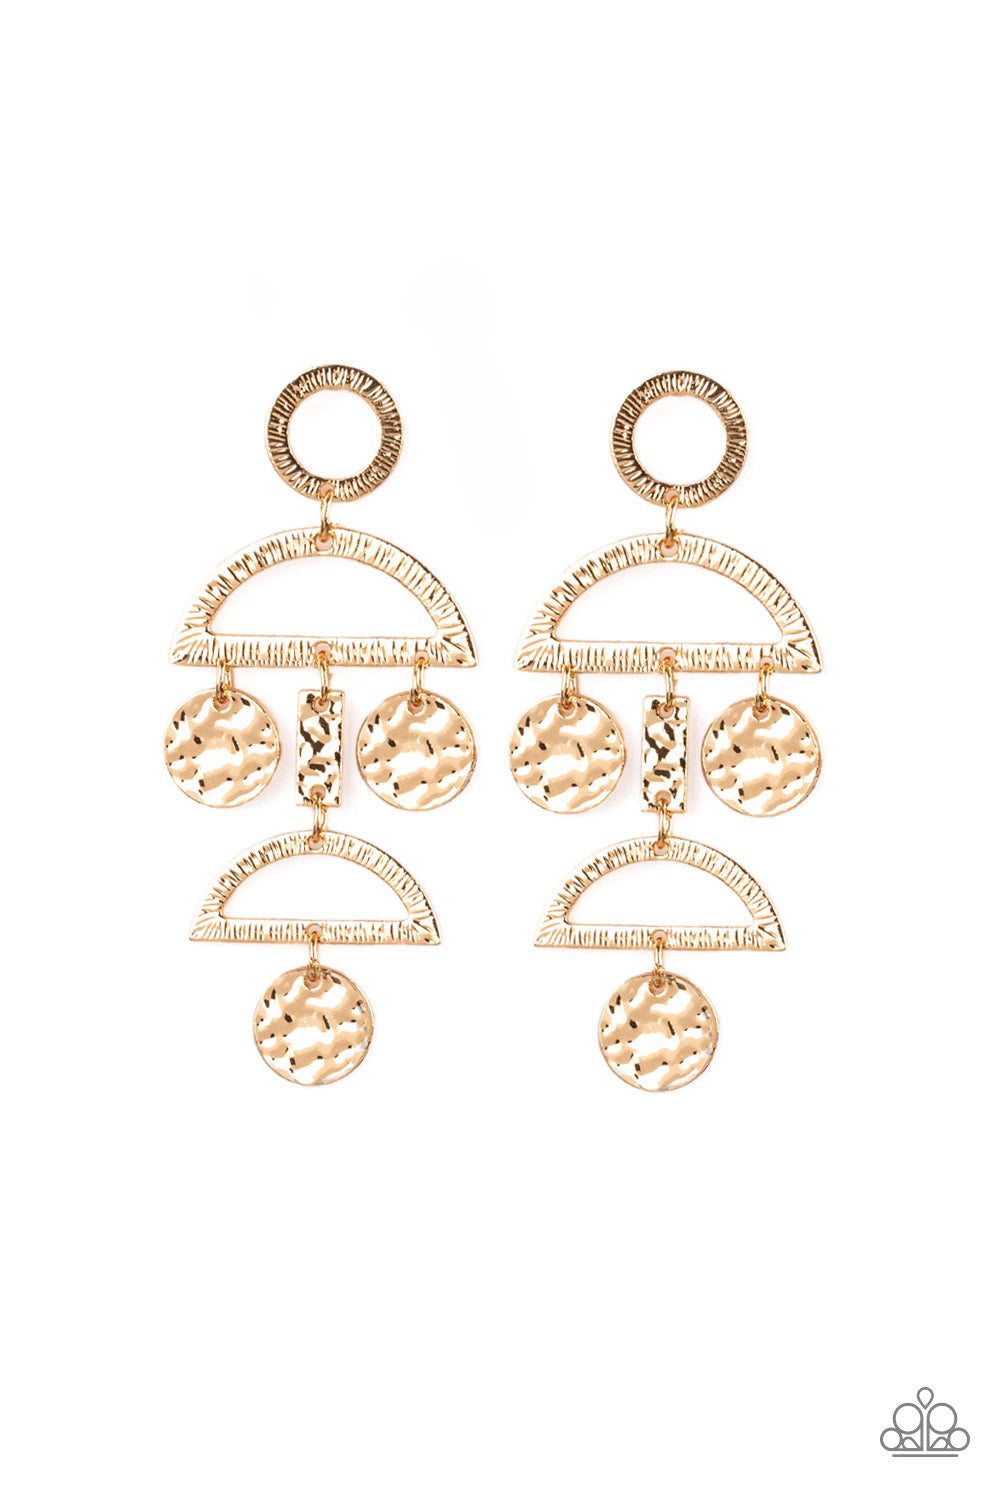 Incan Eclipse - Gold Fashion Earrings - Paparazzi Accessories - Delicately hammered and etched in shimmery textures, a collection of gold discs and gold frames connect into a tribal inspired lure. Earring attaches to a standard post earring.